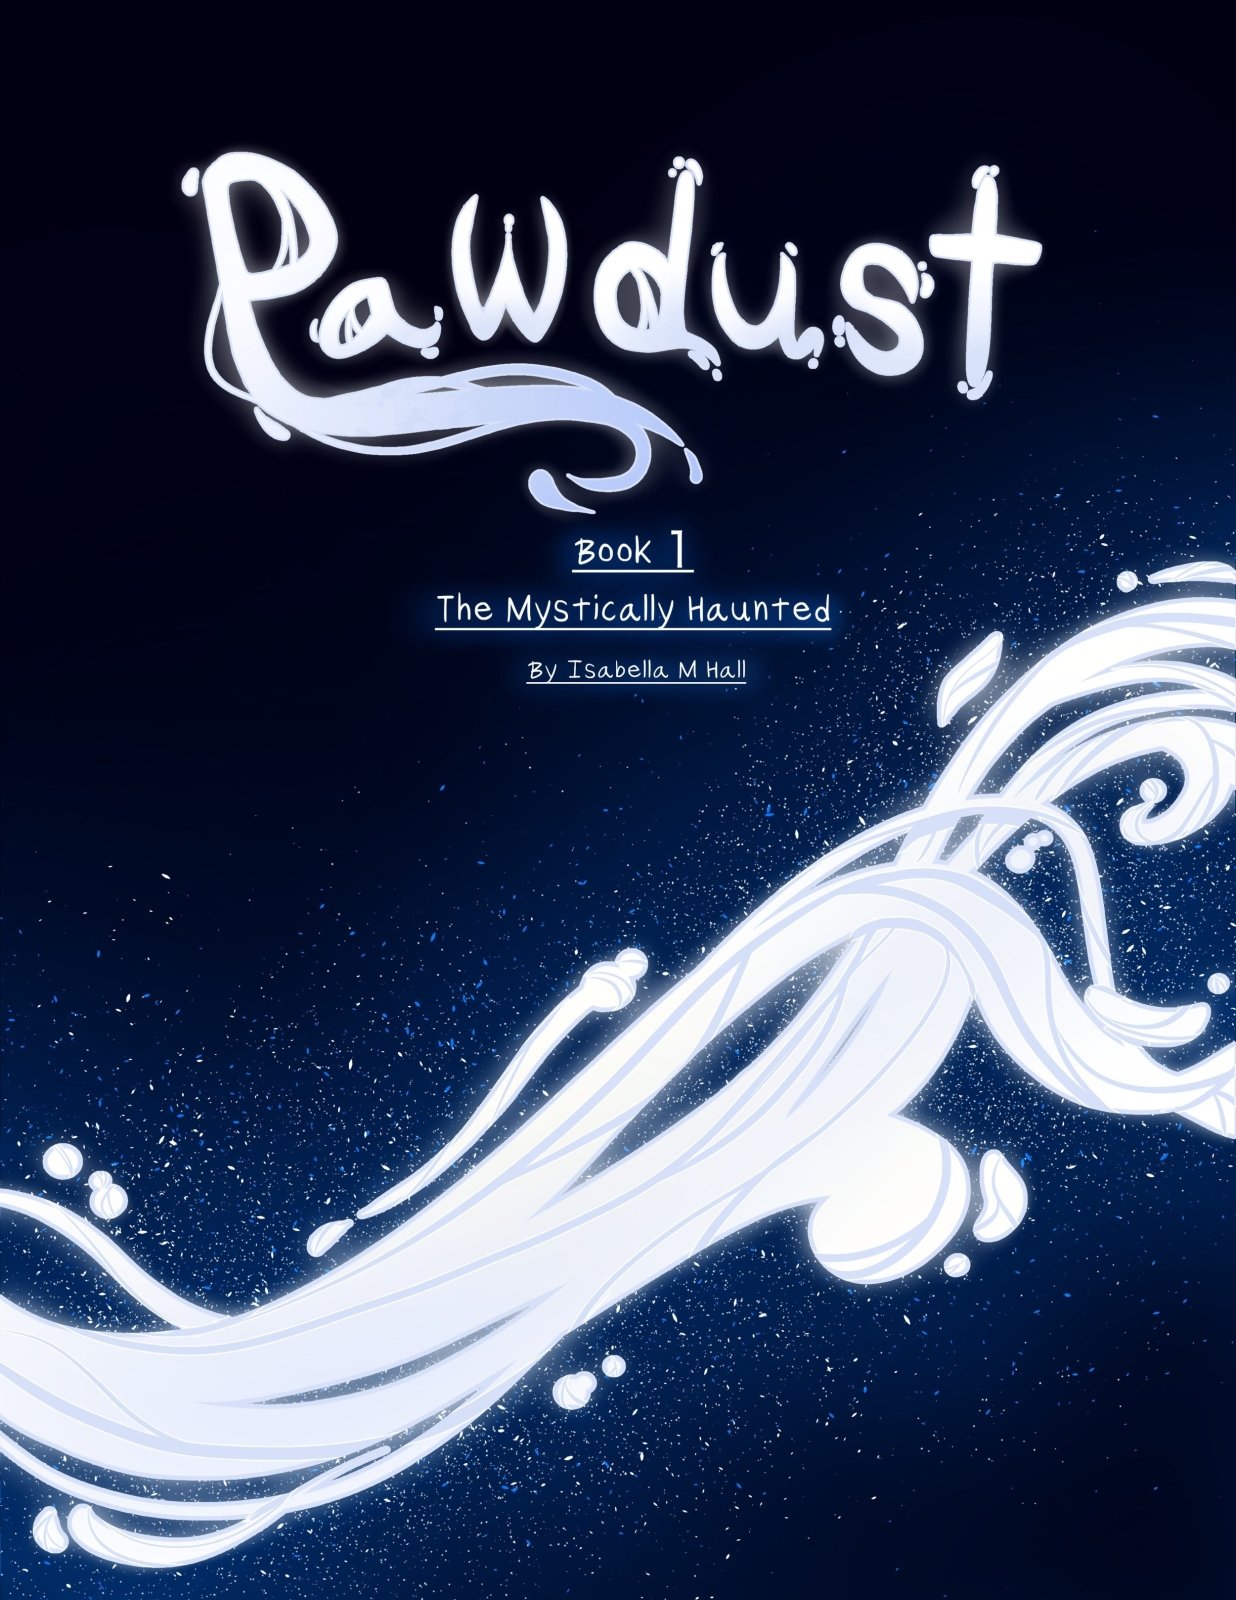 Pawdust Book 1: The Mystically Haunted - The Fourth Place